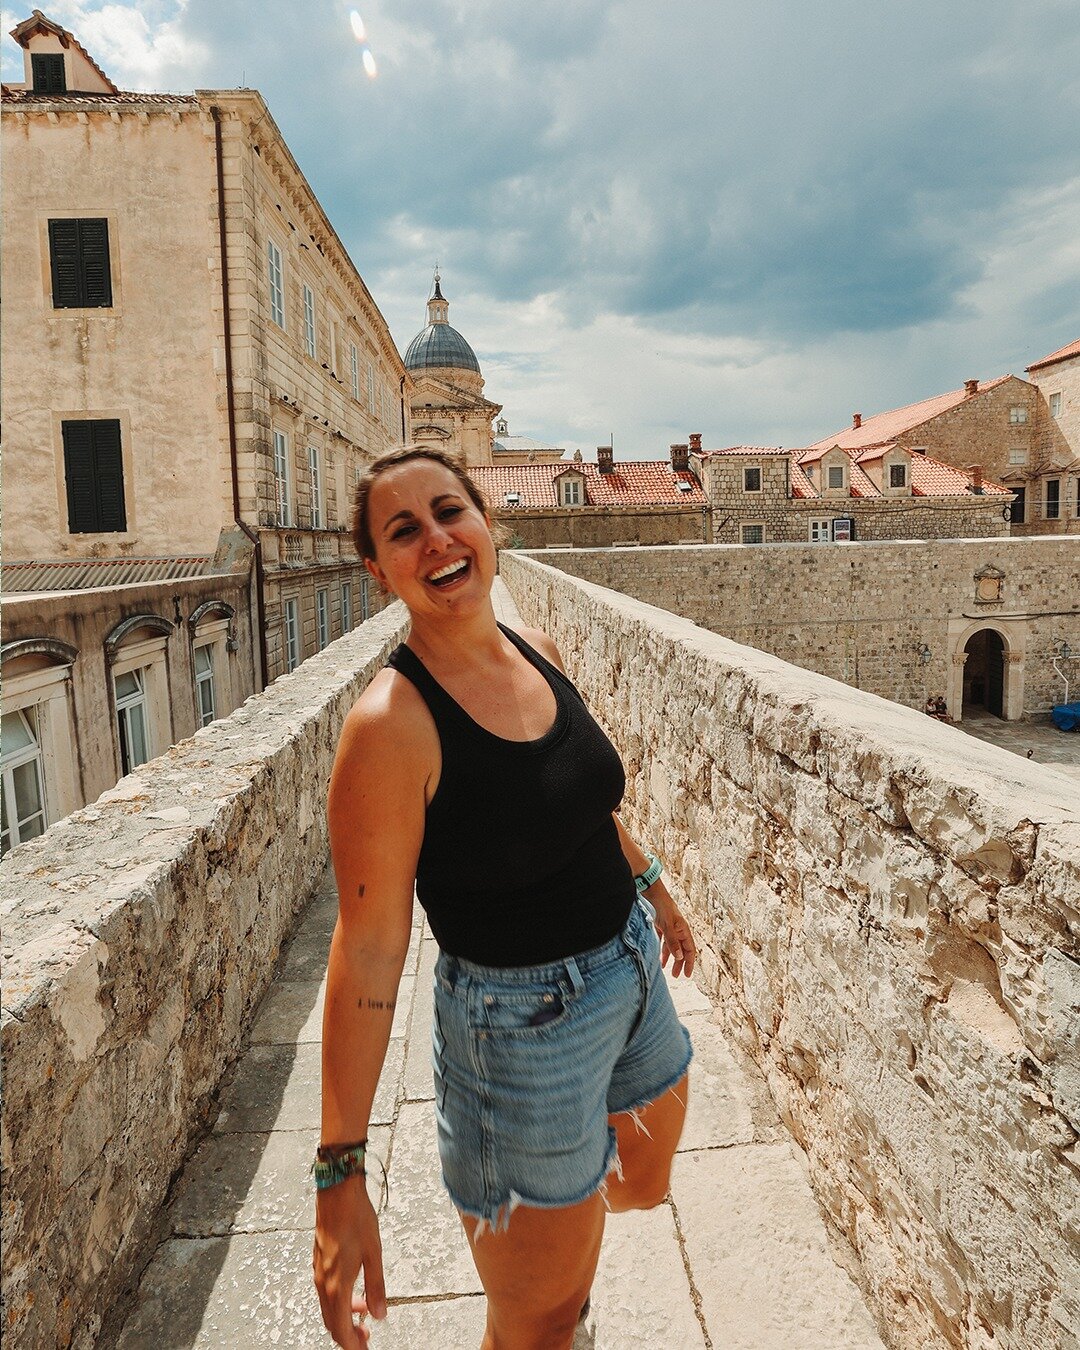 We Have Finally Arrived at King's Landing! (Dubrovnik, Croatia)

If you aren't familiar with Game of Thrones, then you might not know what I just said. Nonetheless it is a really beautiful place. We got really lucky with the weather and had perfectly